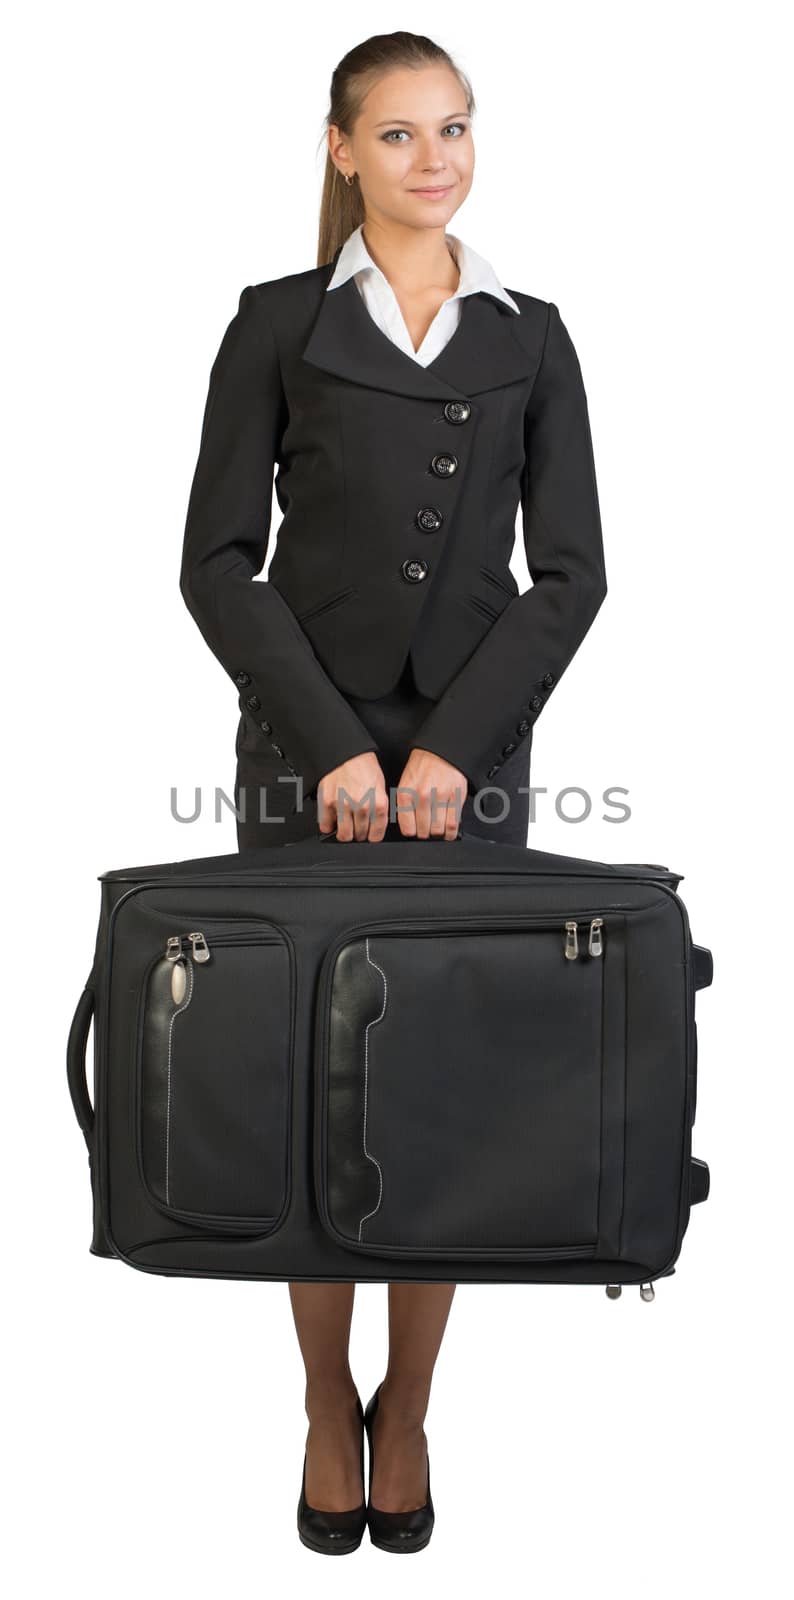 Businesswoman holding suitcase, looking at camera, smiling. Isolated over white background